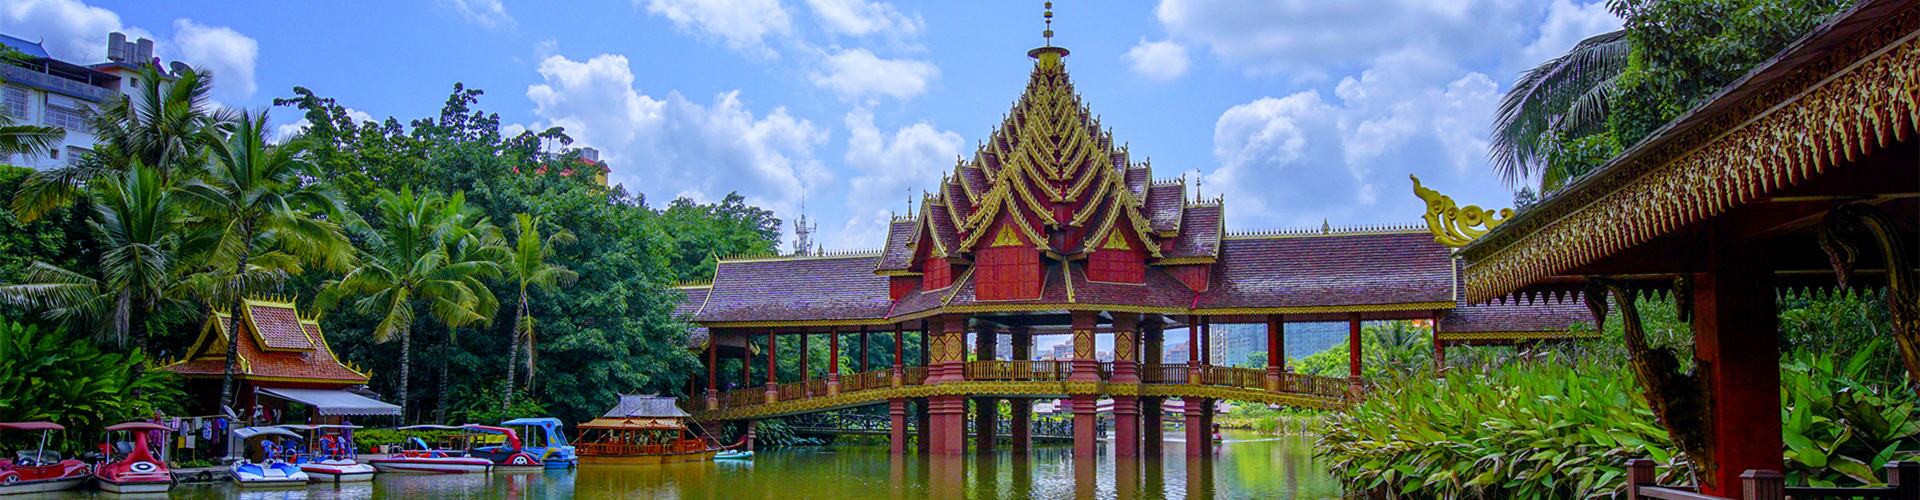 Xishuangbanna Travel Guide - Includes Preparations under COVID-19